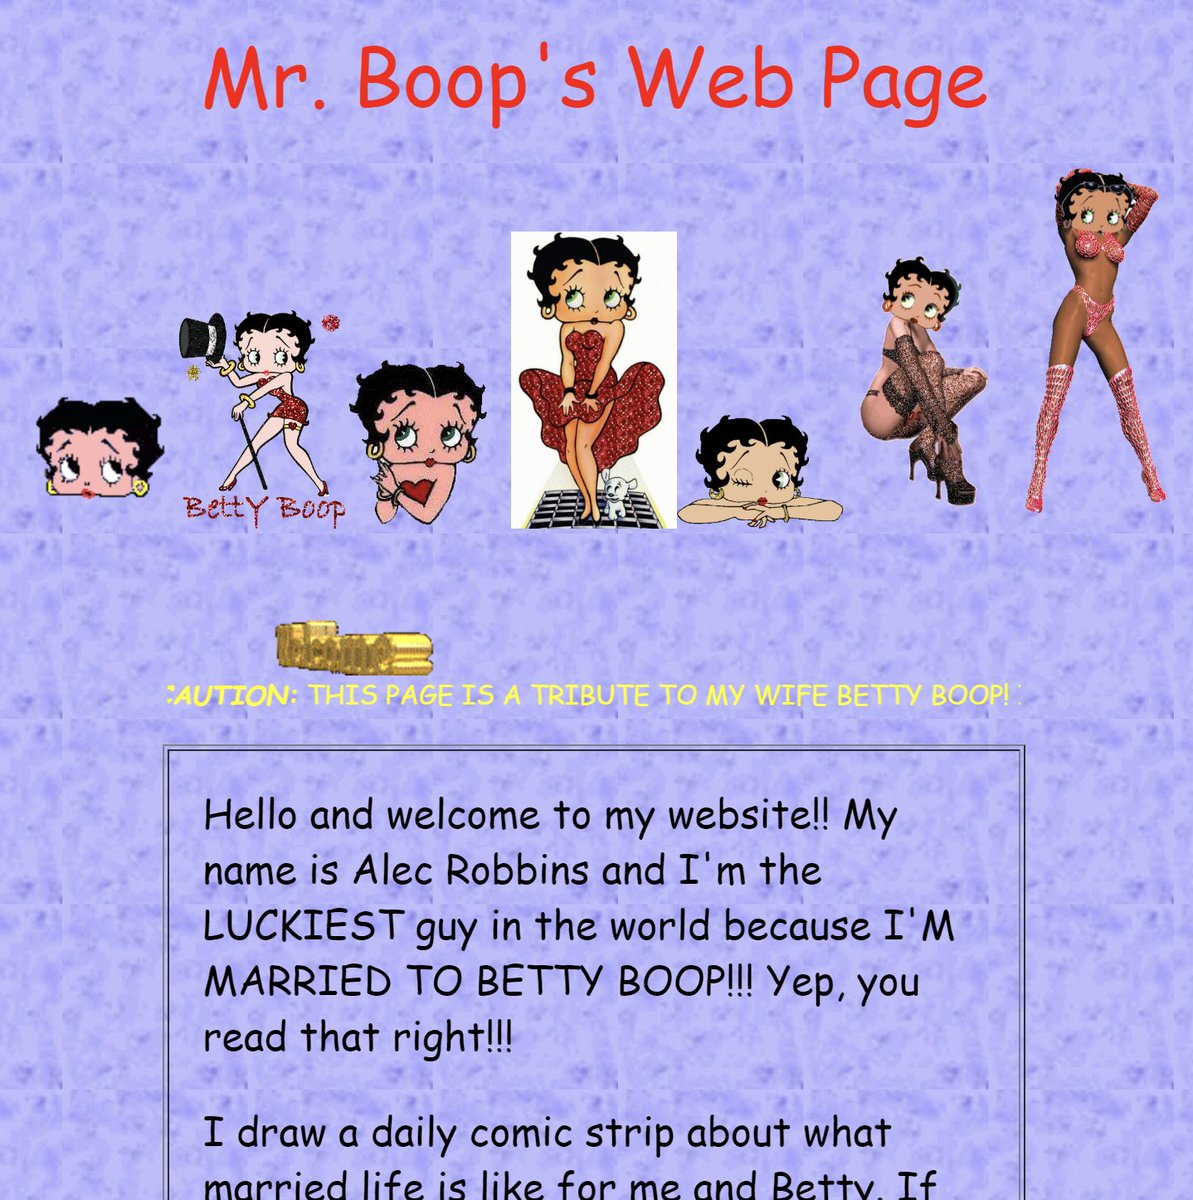 And if you don't have cash to spare you can also now read Mr. Boop comfortably for free all in one place instead of this Twitter thread: head over to  http://mrboop.net  :)